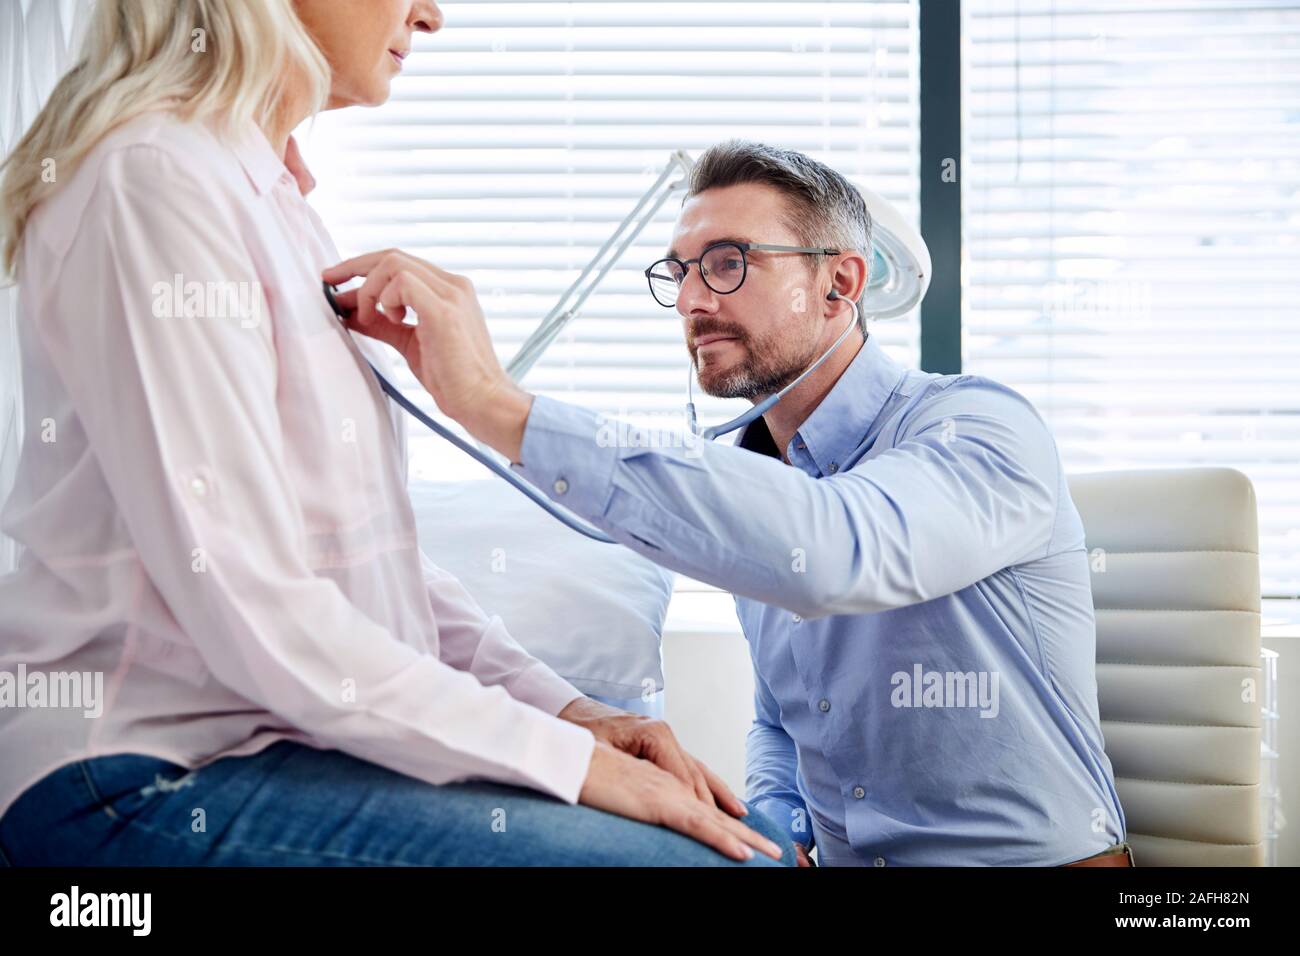 Mature Female Patient Having Medical Exam With Doctor In Office Stock Photo